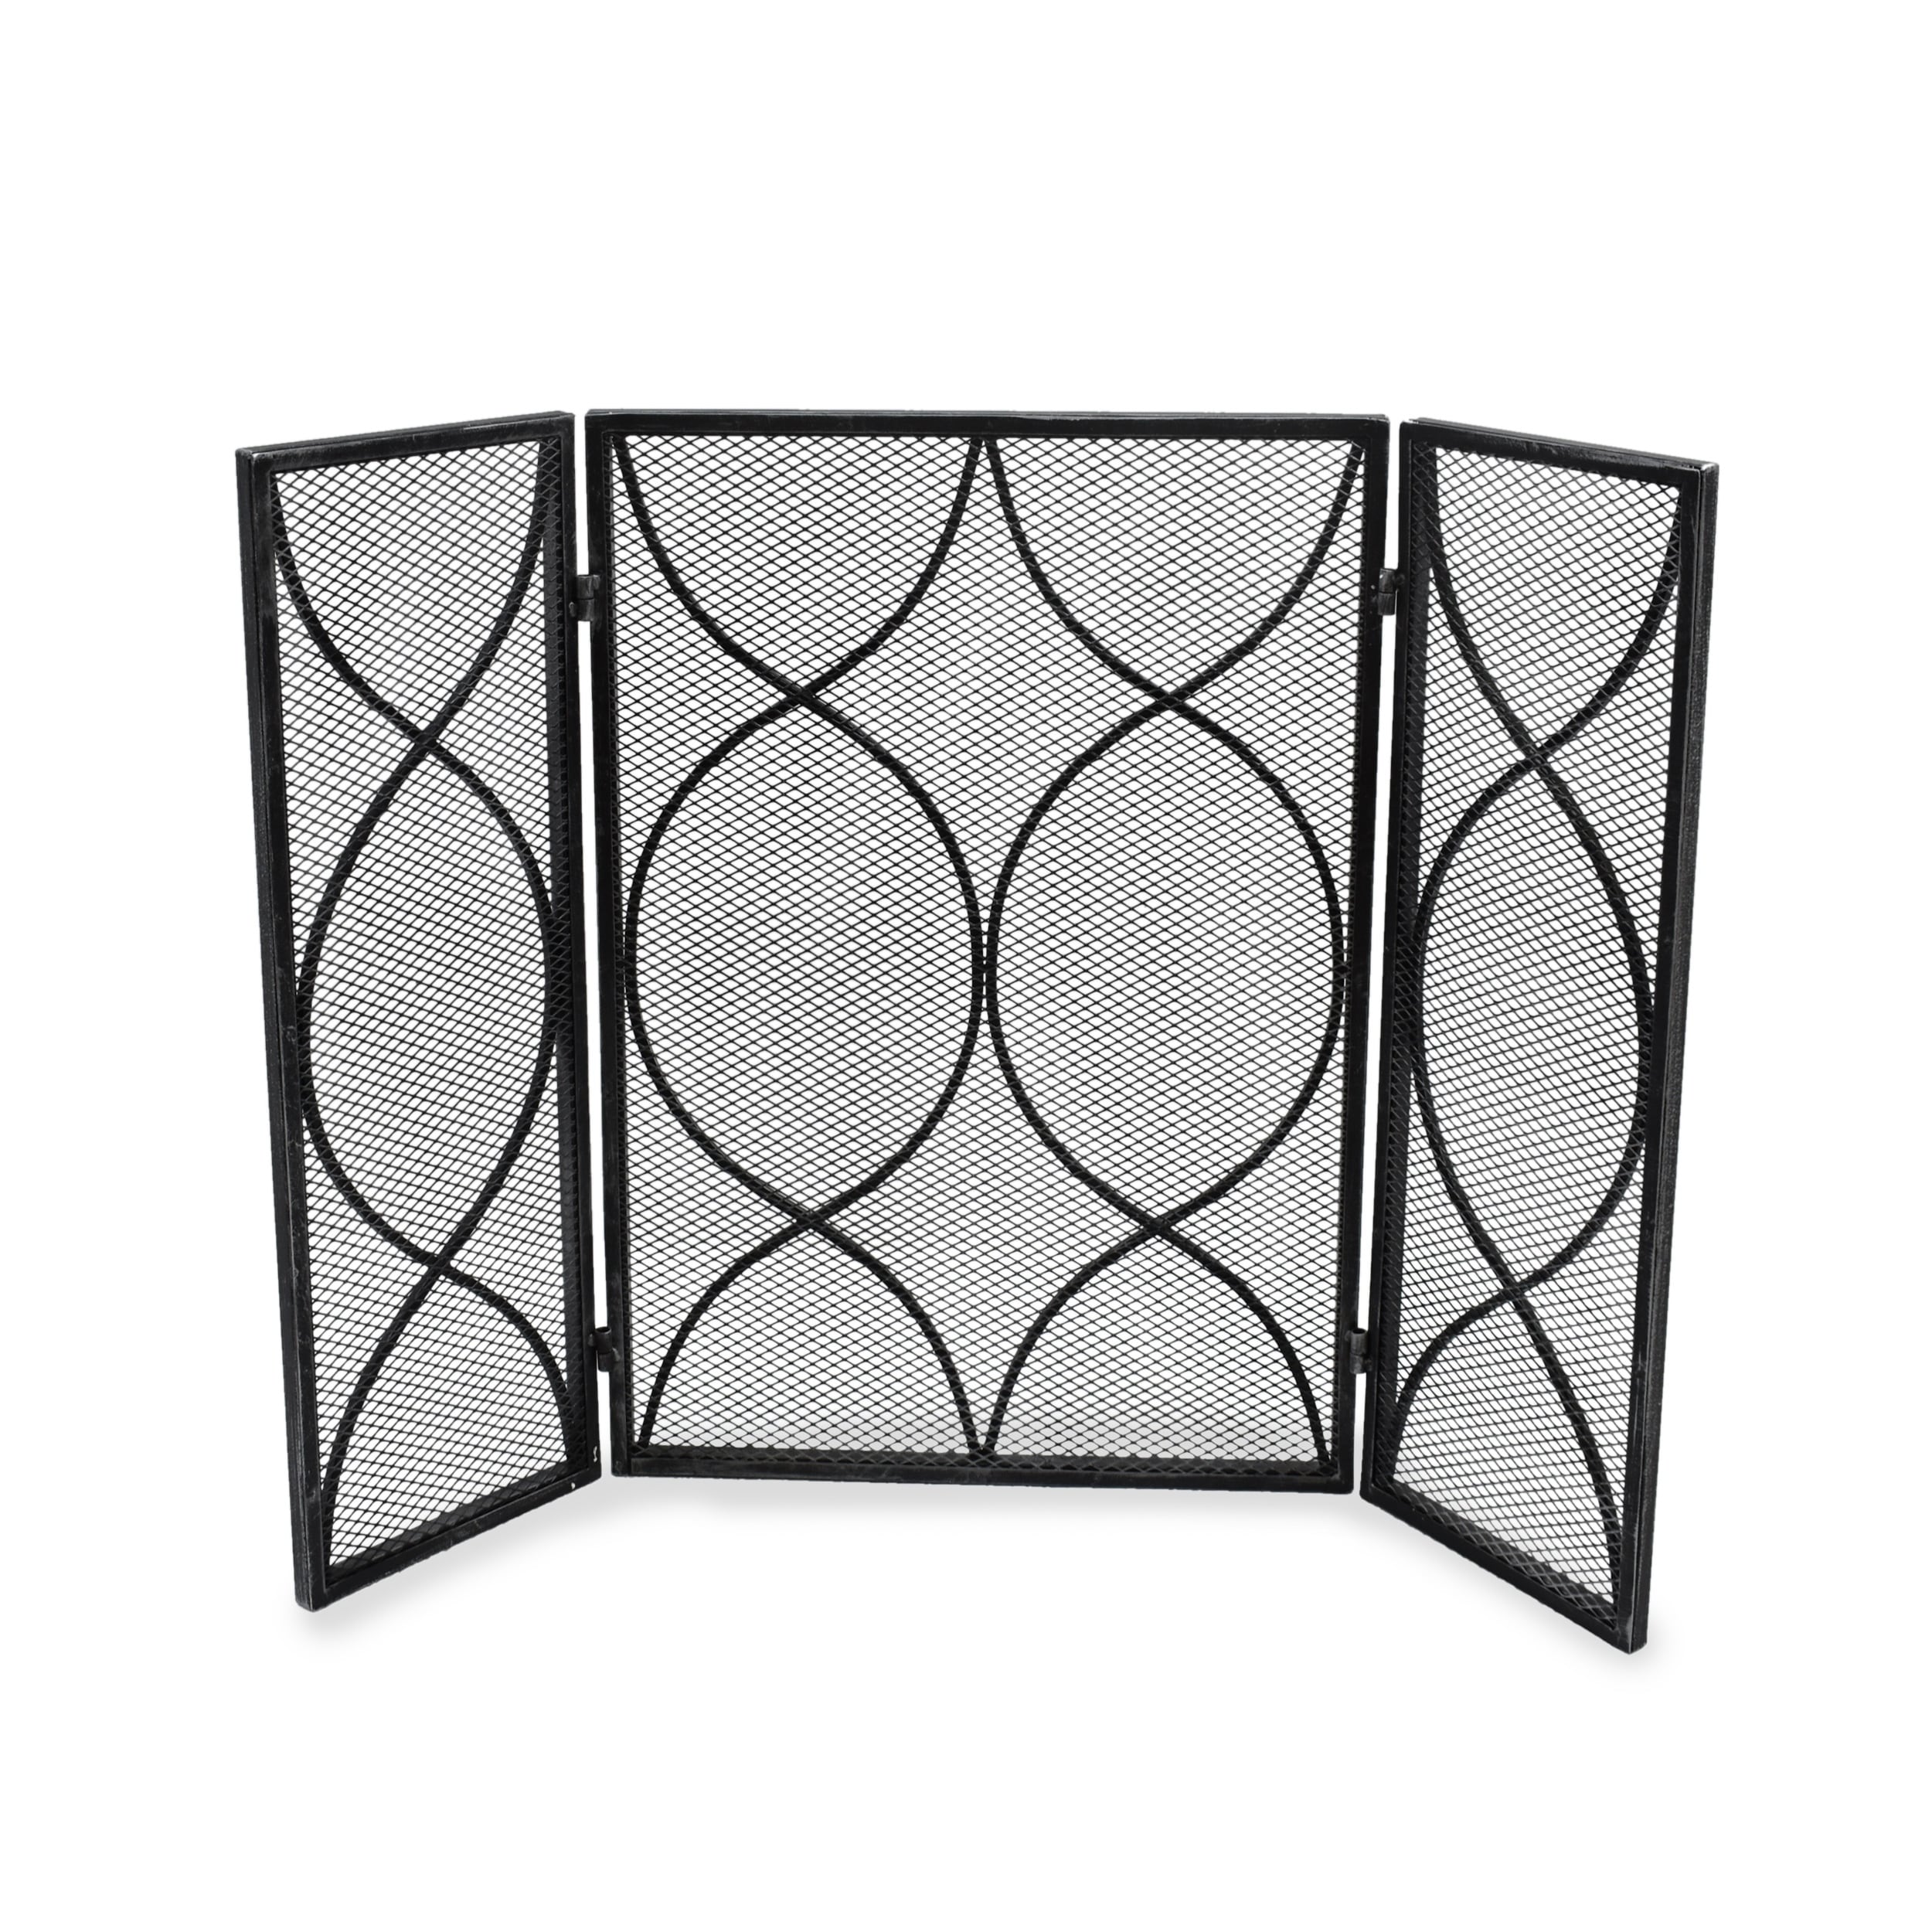 Pleasants Modern Three Panel Fireplace screen by Christopher Knight Home  1.25W x 41.00L x 29.75H Bed Bath  Beyond 27569250